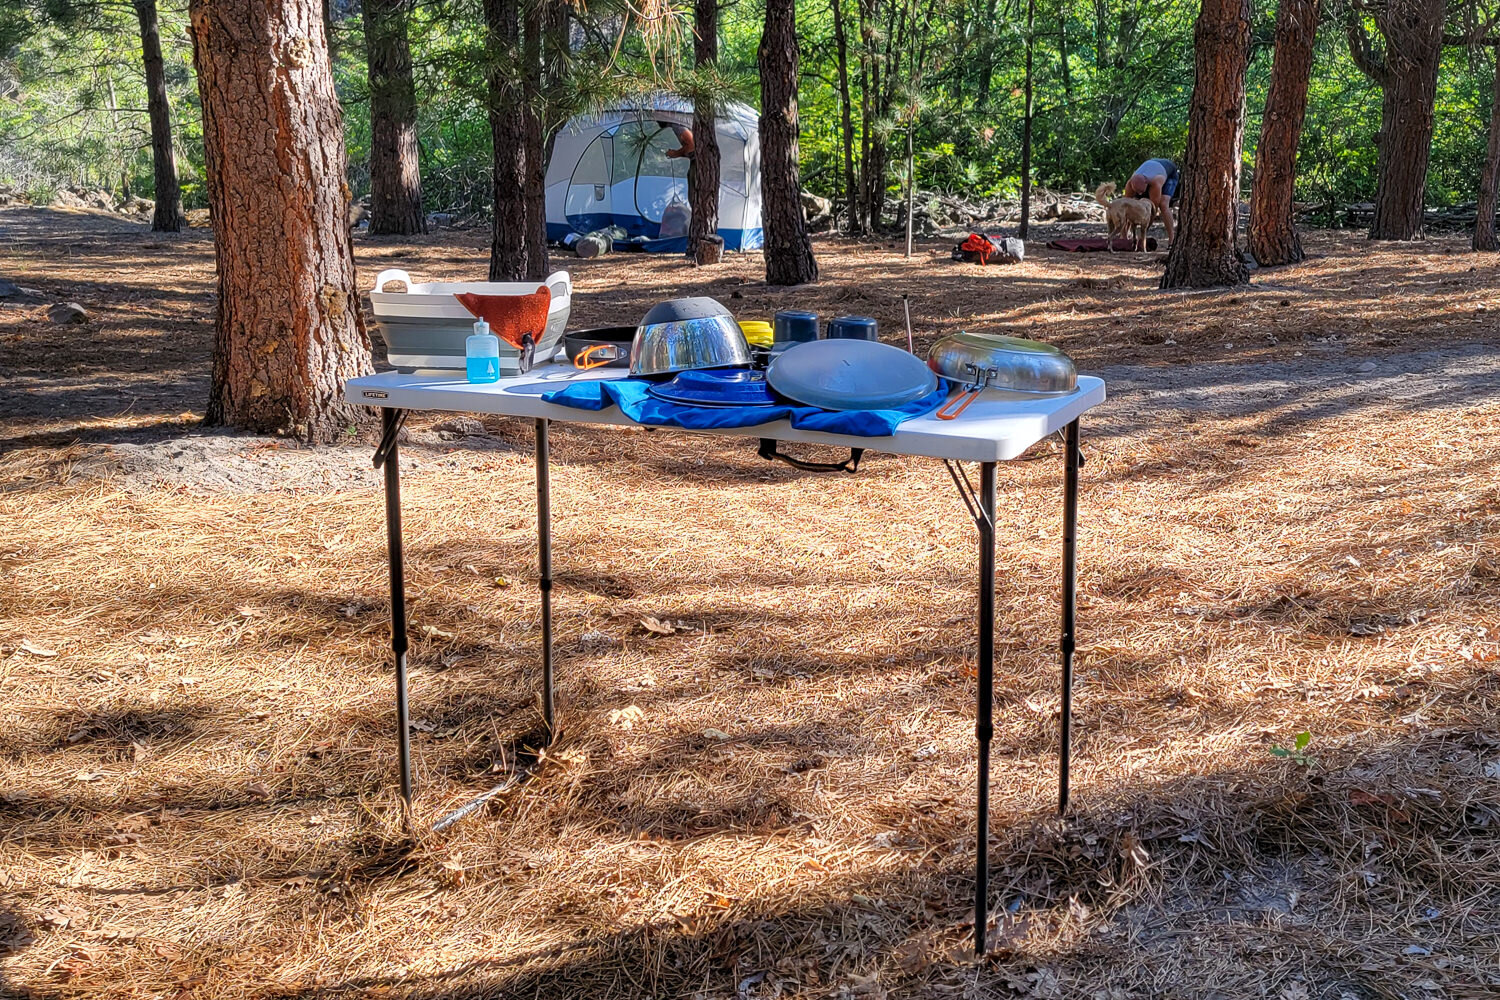 The Lifetime Camping and Utility Folding Table works great for cooking, washing dishes, dining, and more